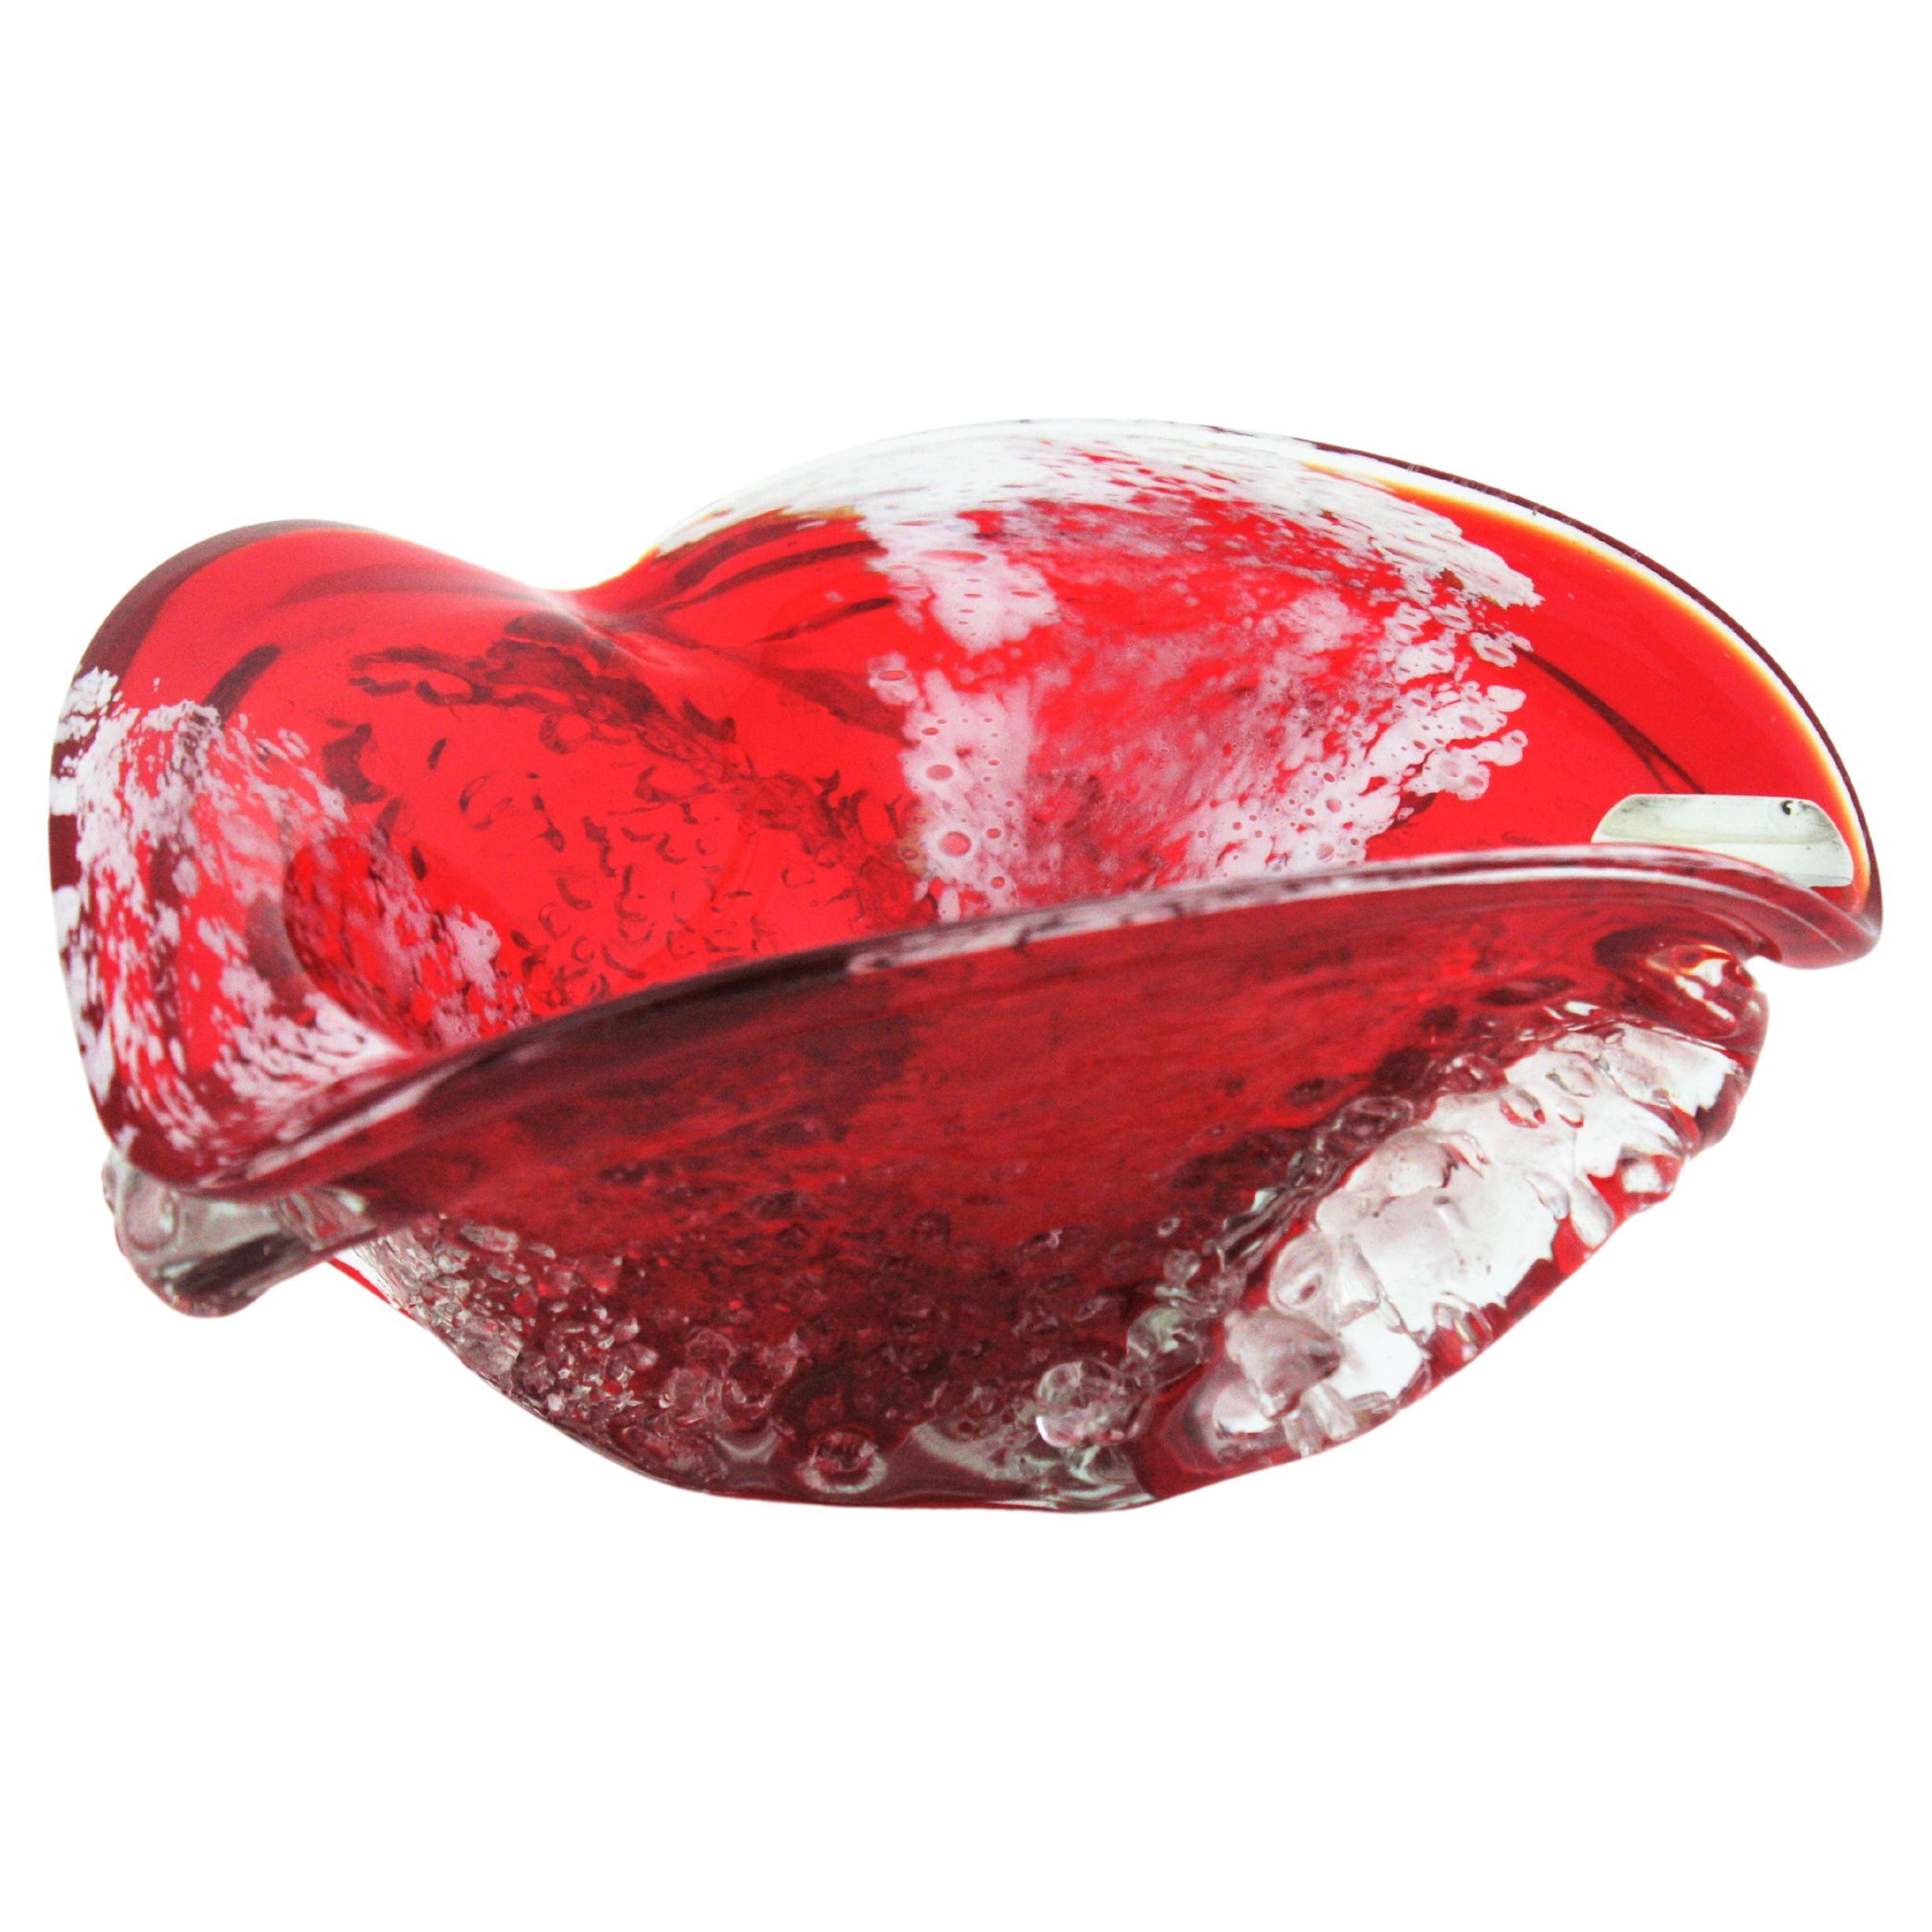 Hand blown Macette Murano glass ashtray, red, white and clear glass, Italy, 1950s.
This eye-catching triangular bowl is made with red glass submerged into clear glass. It has accents in white and the outer surface is finished using the 'macette'